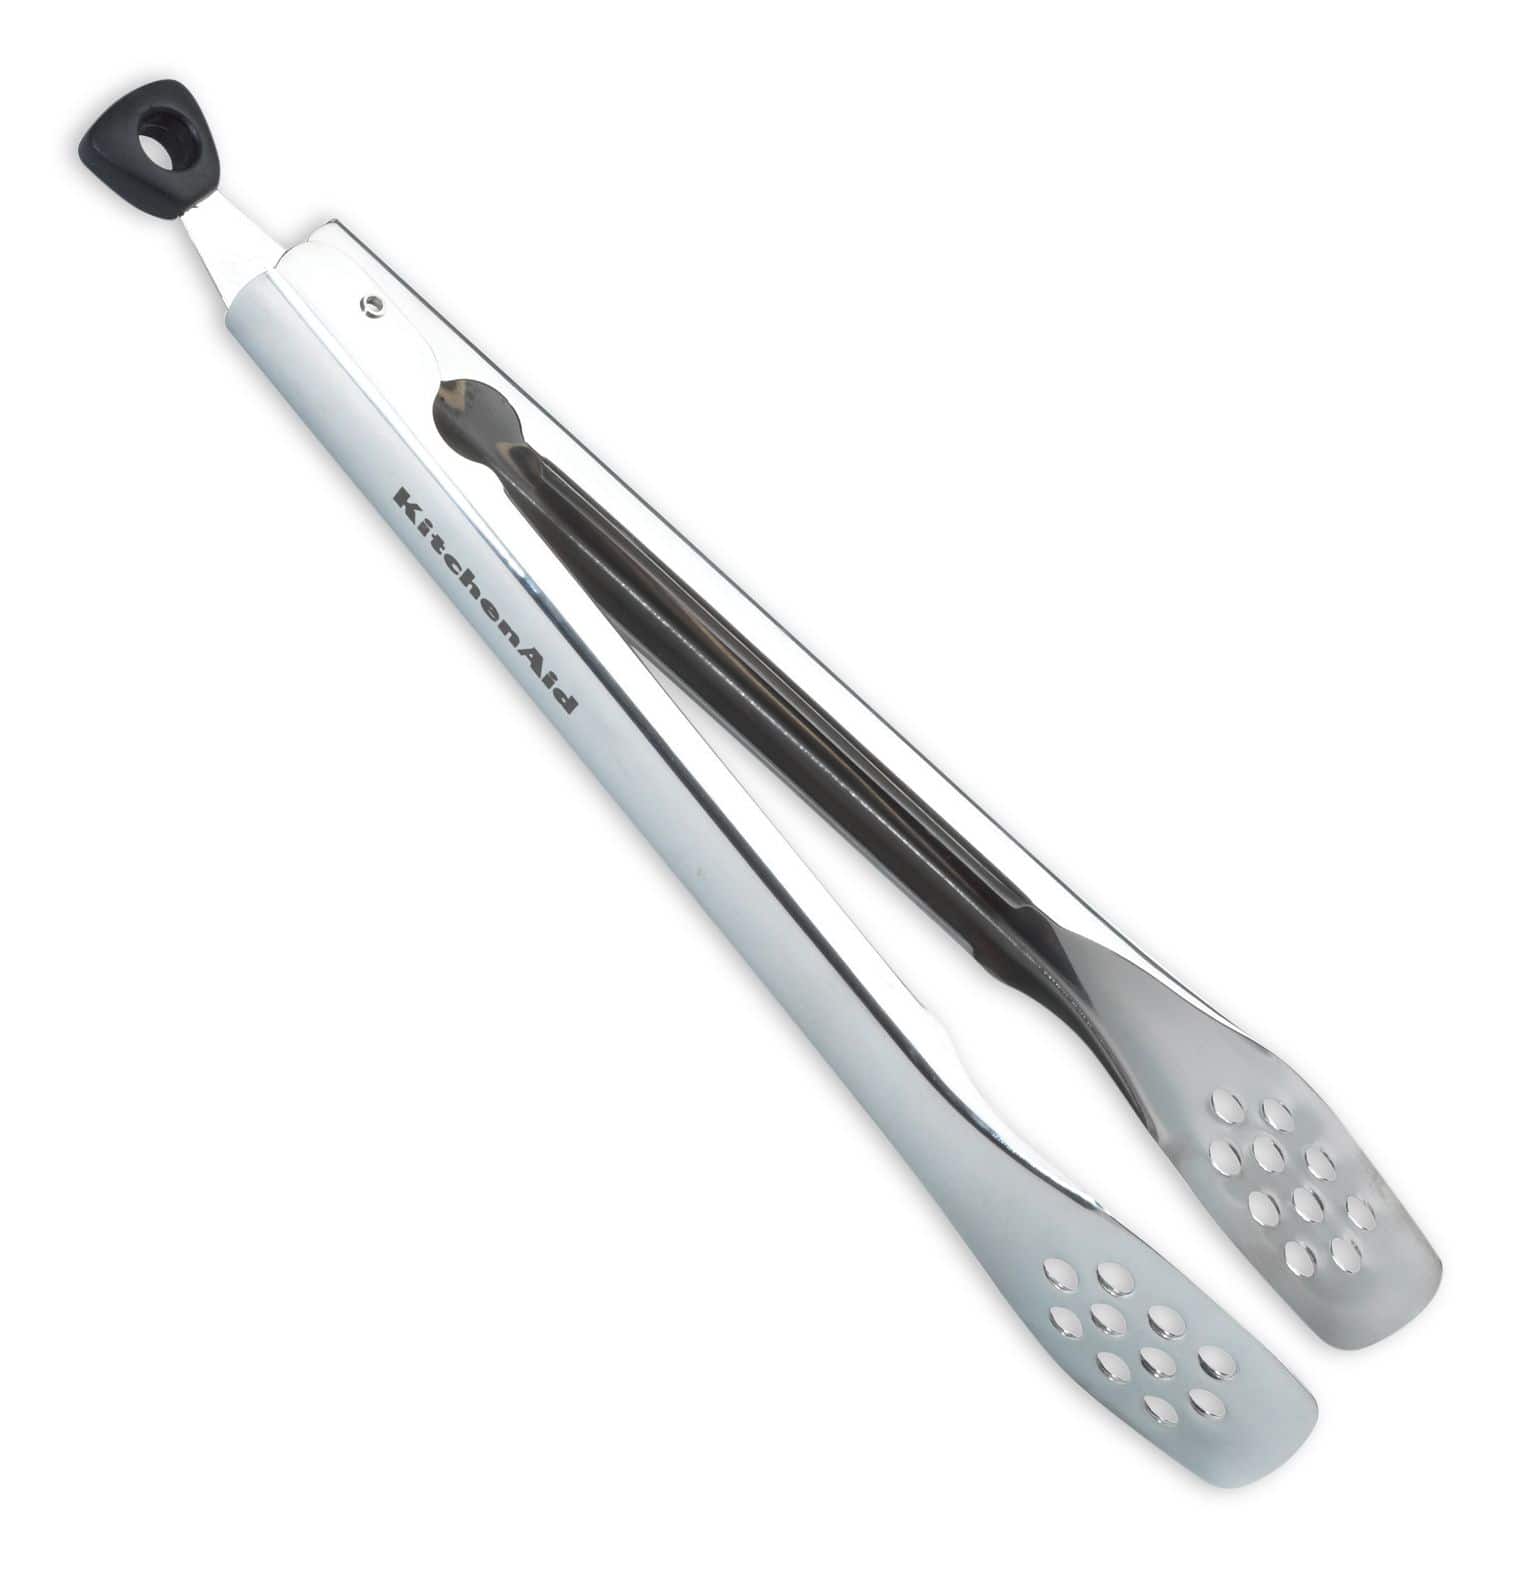 https://media-www.canadiantire.ca/product/living/kitchen/kitchen-tools-thermometers/1420782/kitchenaid-stainless-steel-tongs-9--9b6b1f7a-3add-4546-b39e-ffc0511ad1d4-jpgrendition.jpg